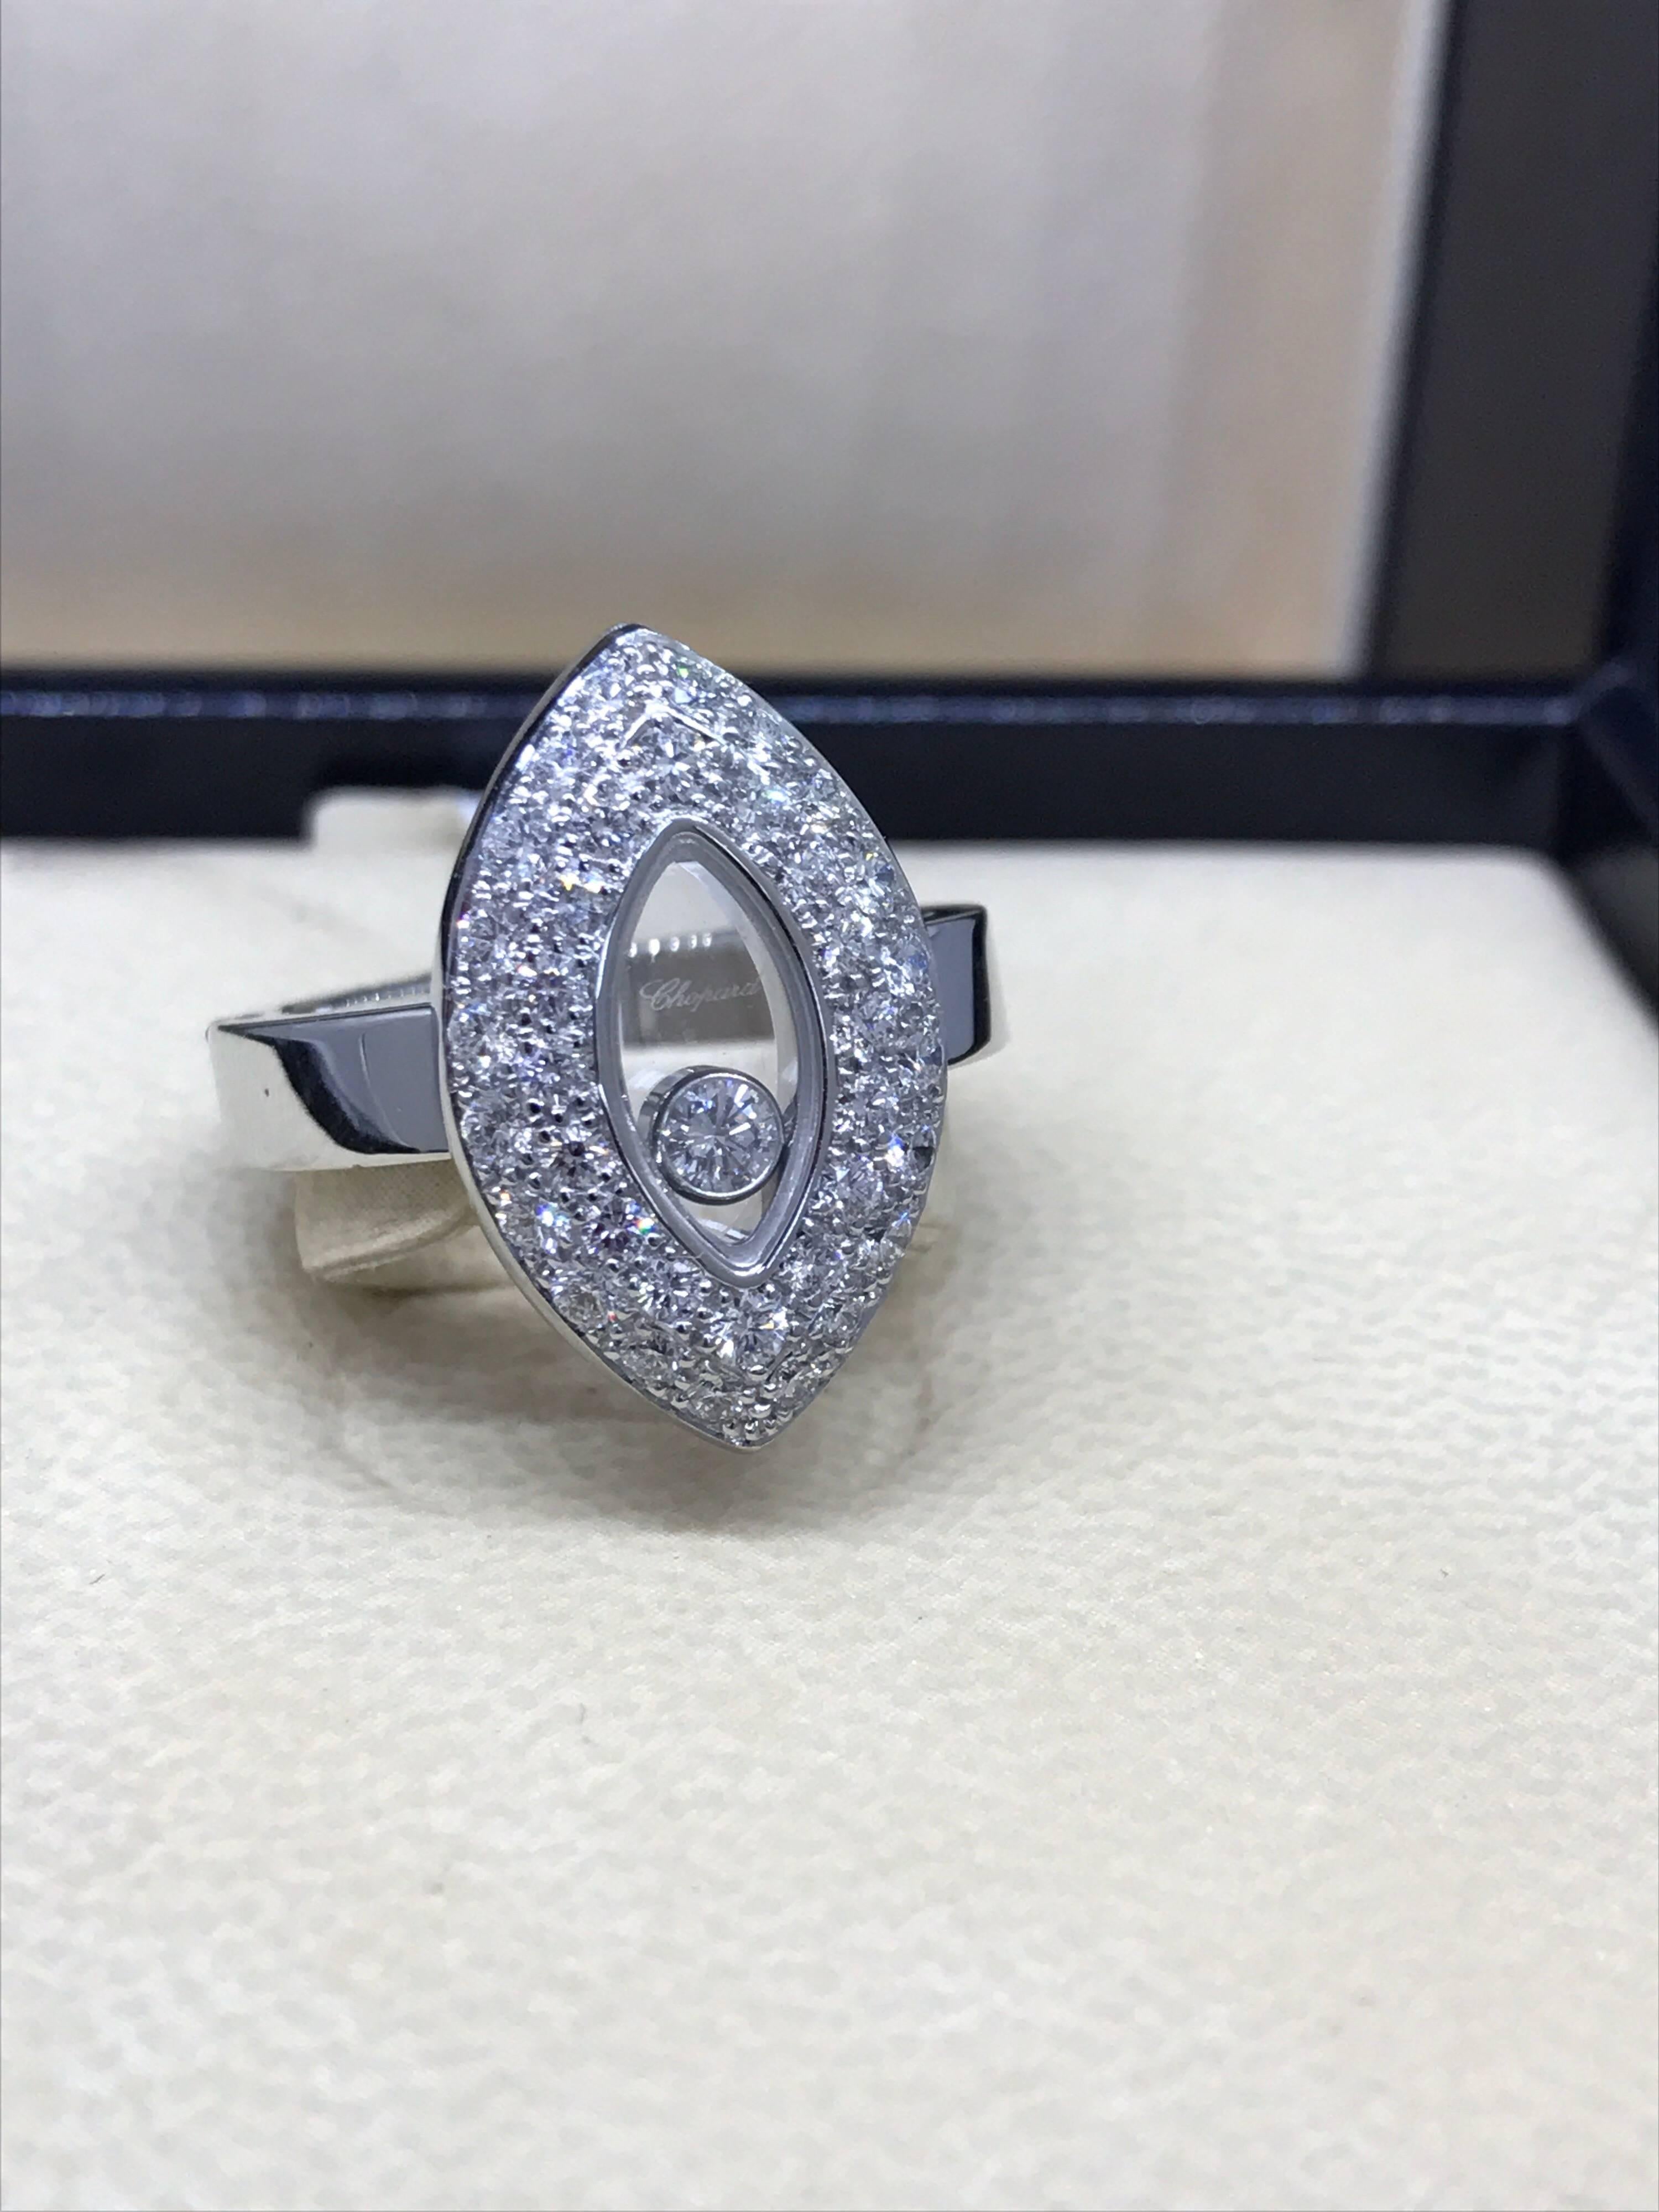 Chopard Happy Diamonds 18 Karat White Gold Tear Drop Shape Ring 82/5723 In Excellent Condition For Sale In New York, NY